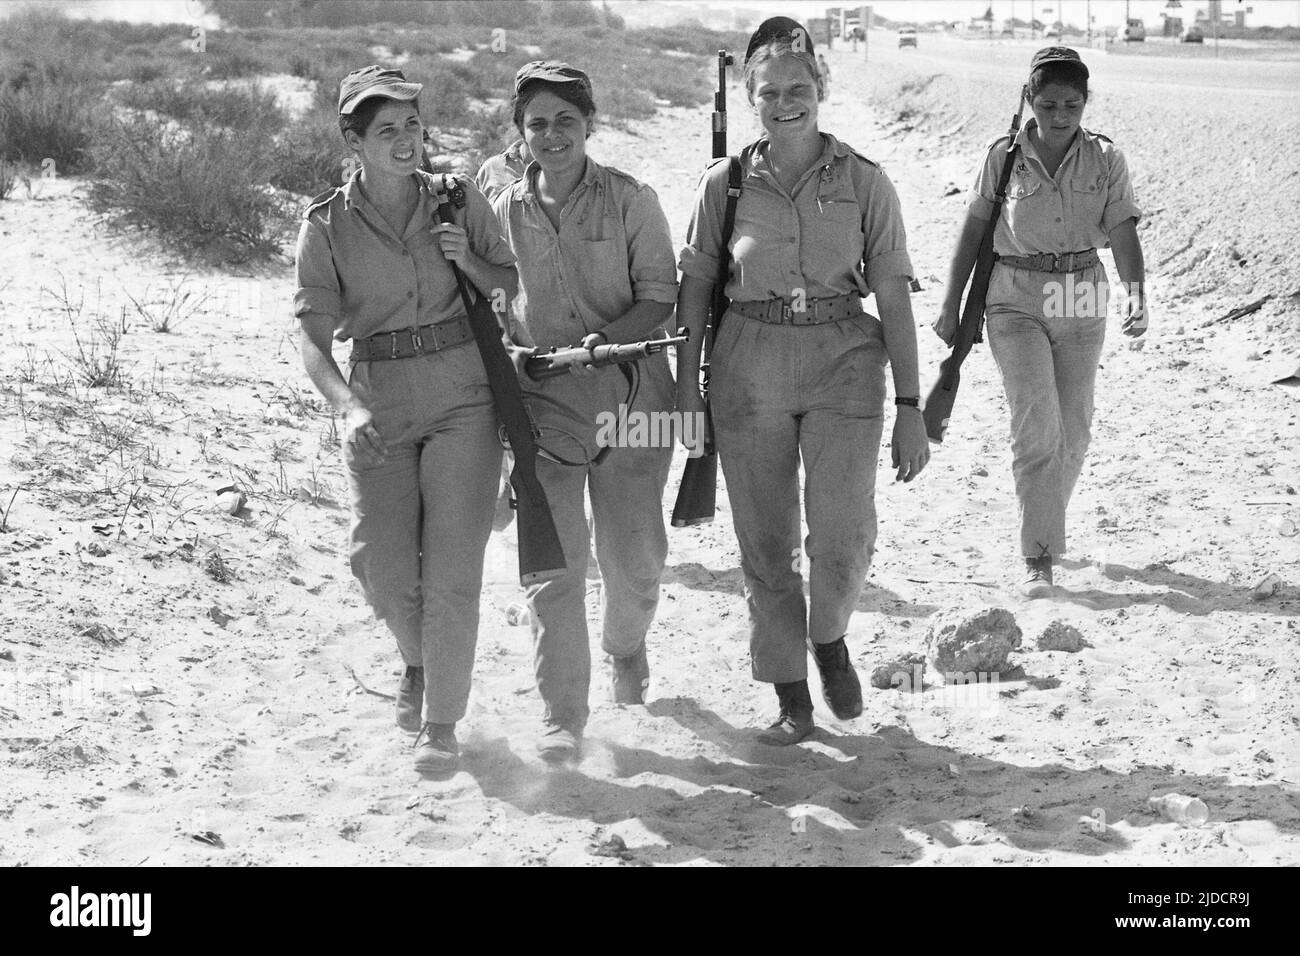 Israeli soldiers marching with their rifles, during basic training, during the march, during the Yom Kippur War, The Yom Kippur War between Israel and the Arab states of Egypt, Jordan and Syria lasted from October 6th to October 25th, 1973, Stock Photo